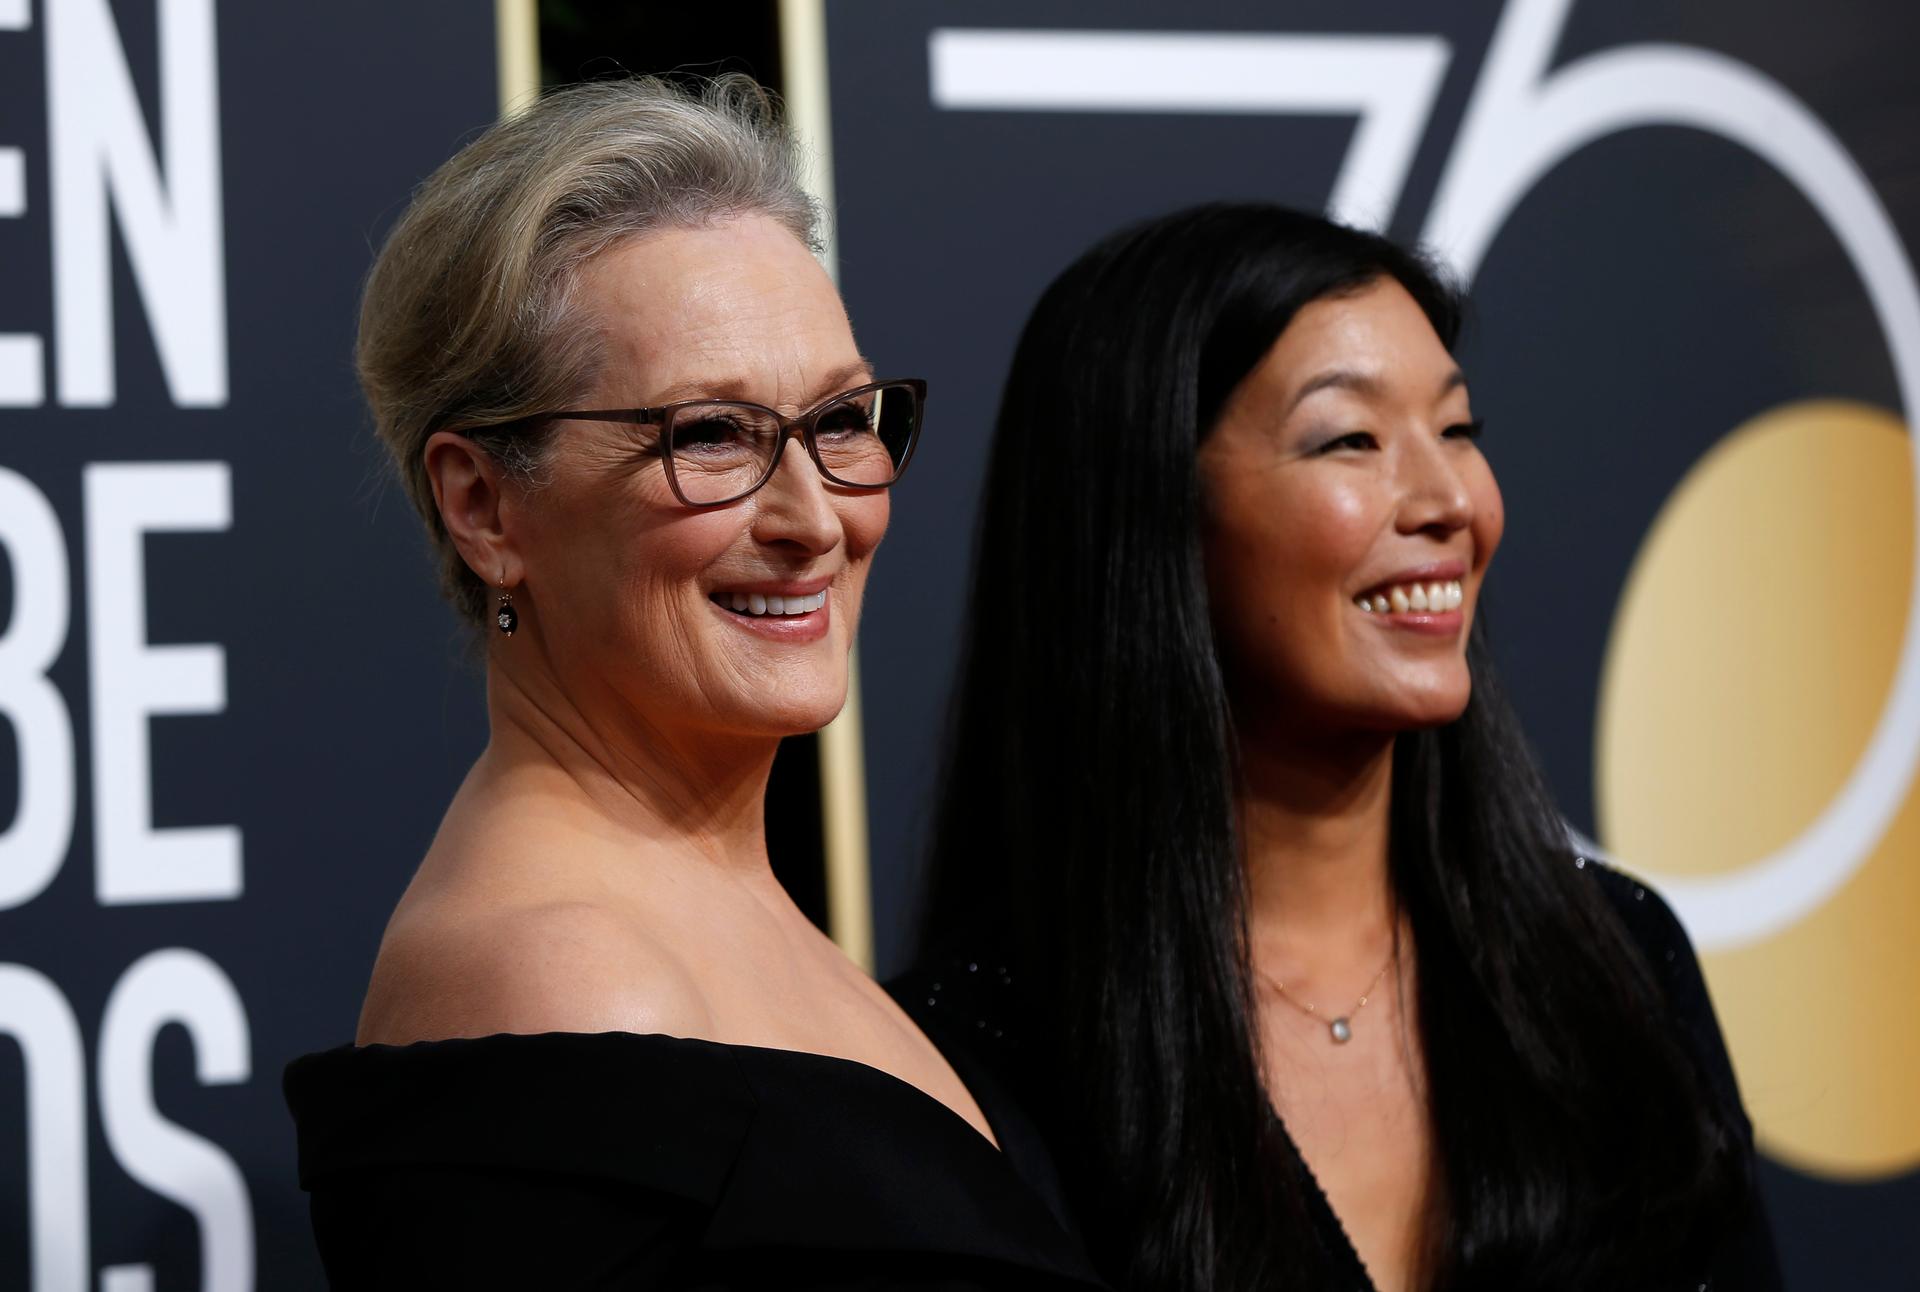 Actress Meryl Streep (L) and the director of the National Domestic Workers Alliance, Ai-jen Poo, at the 75th Golden Globe Awards.